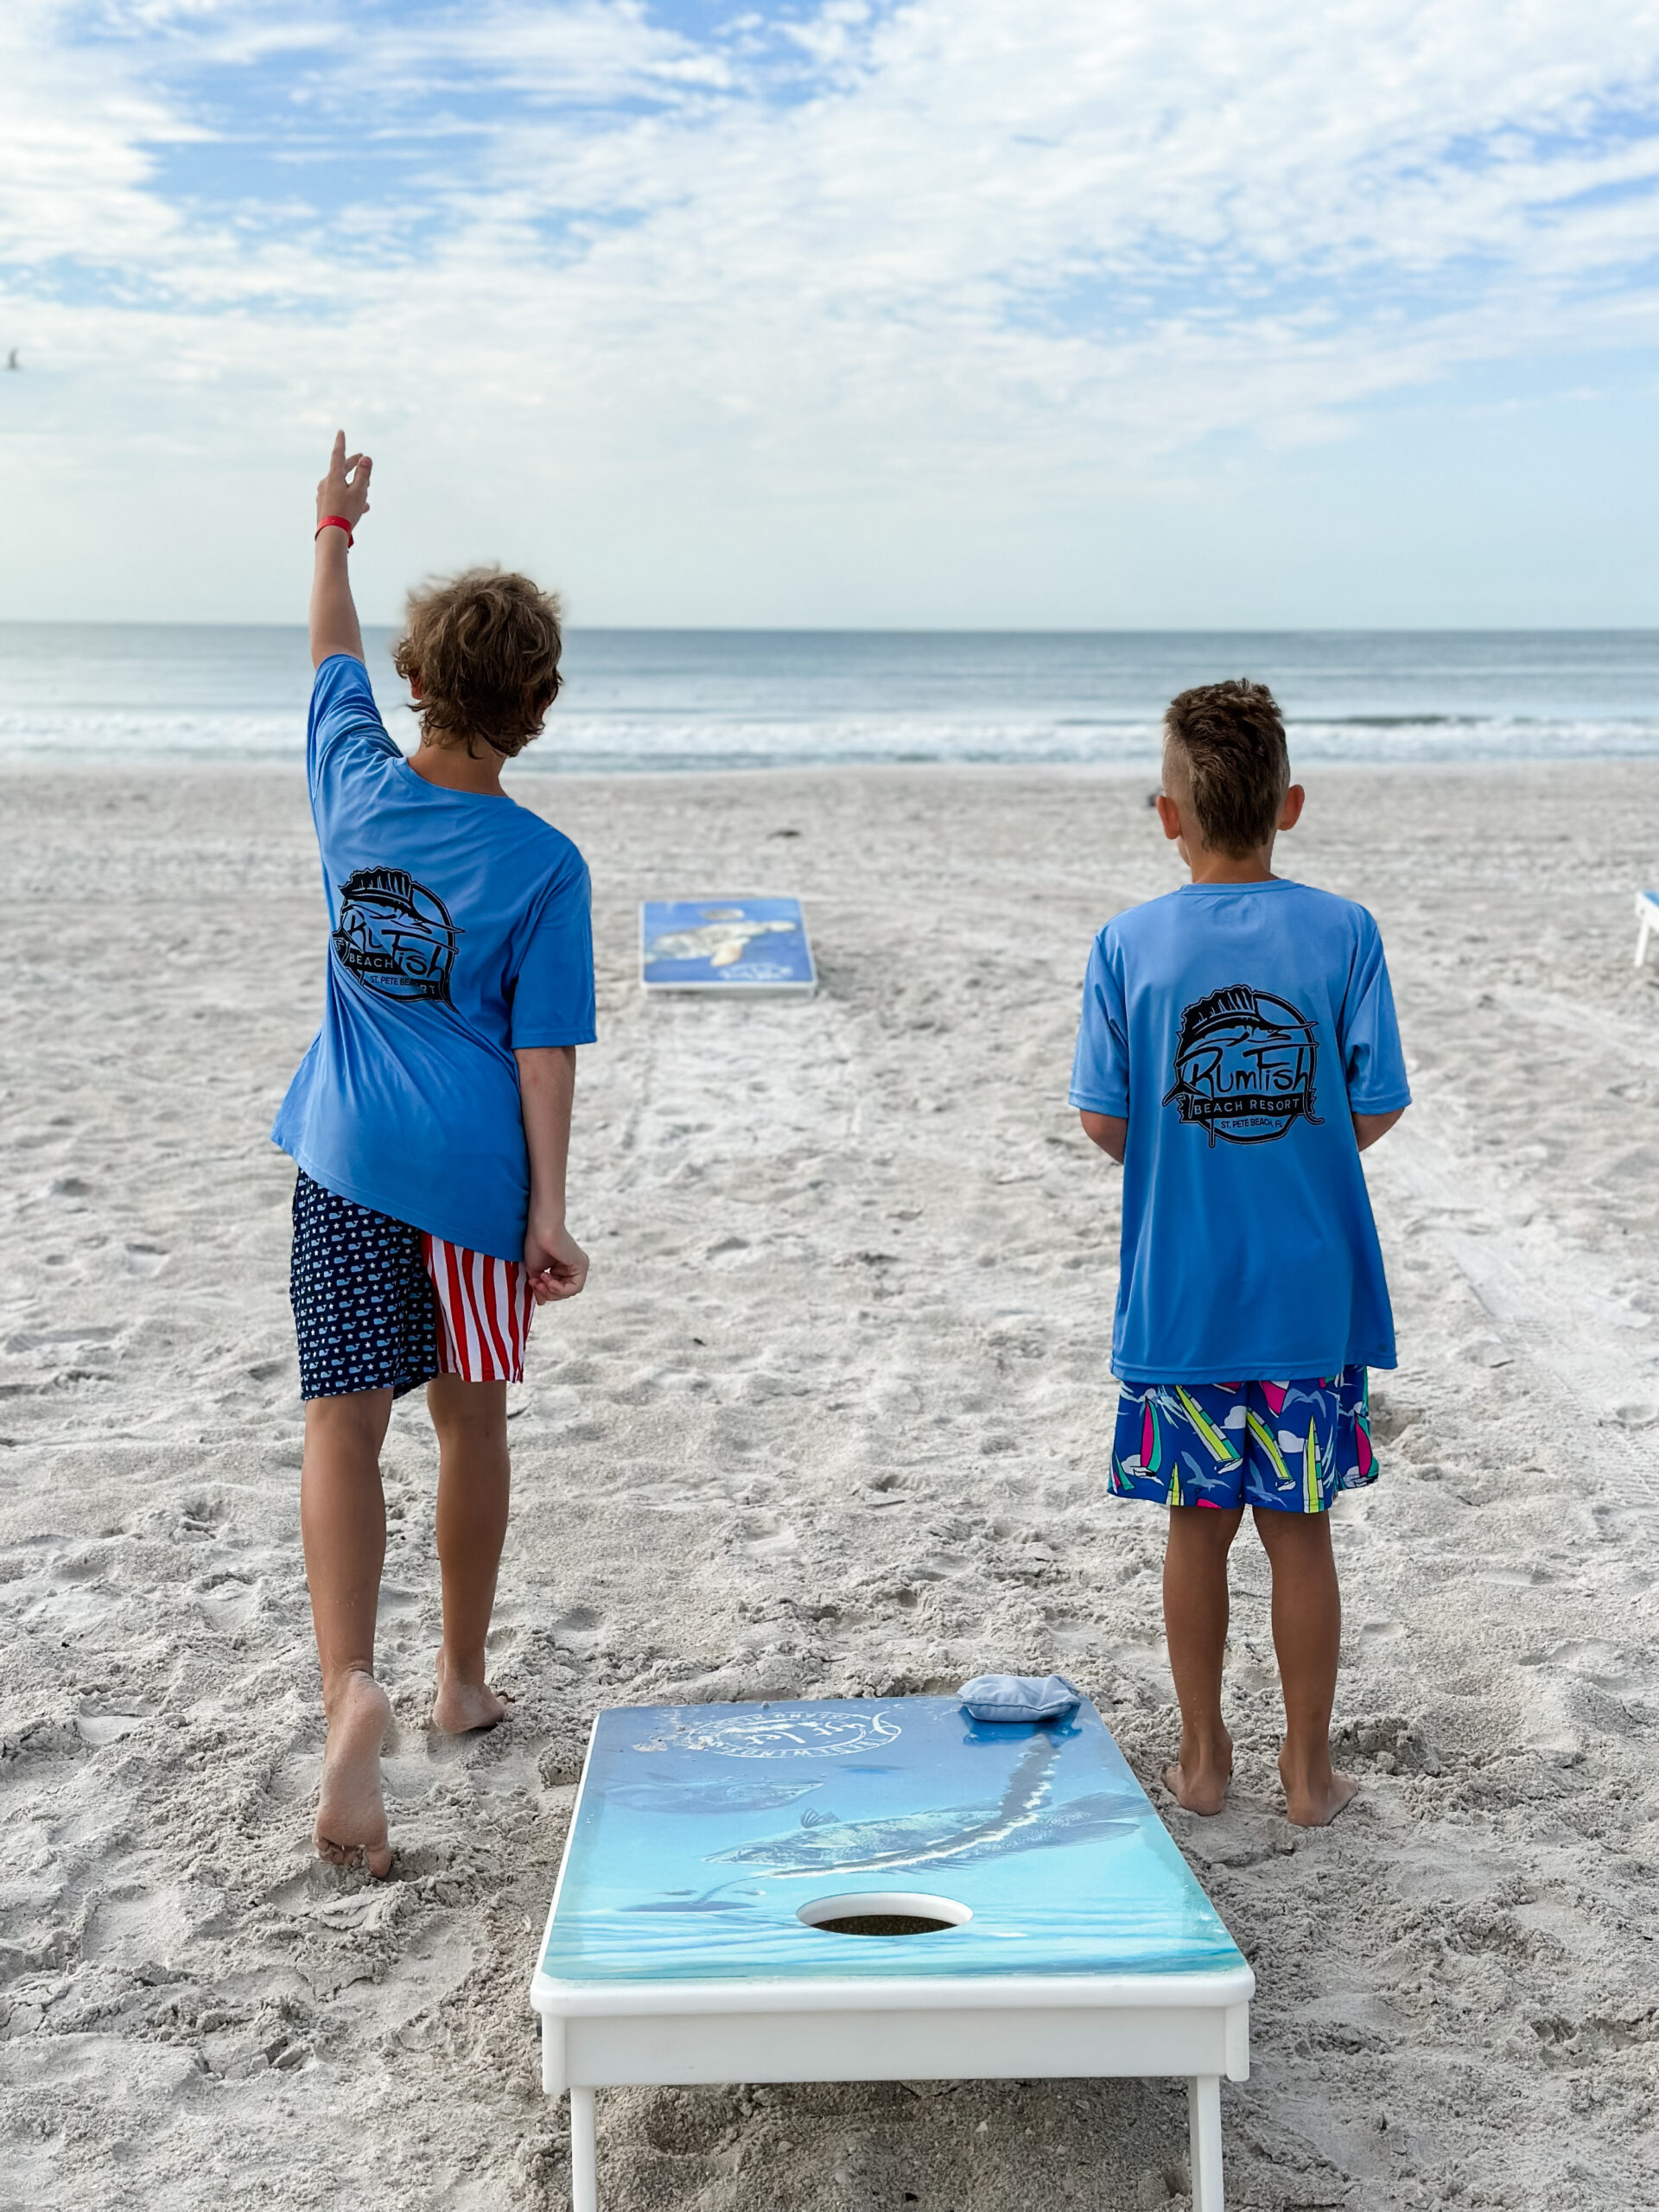 VISIT TRADEWINDS-THE PERFECT FAMILY RESORT IN ST PETE BEACH